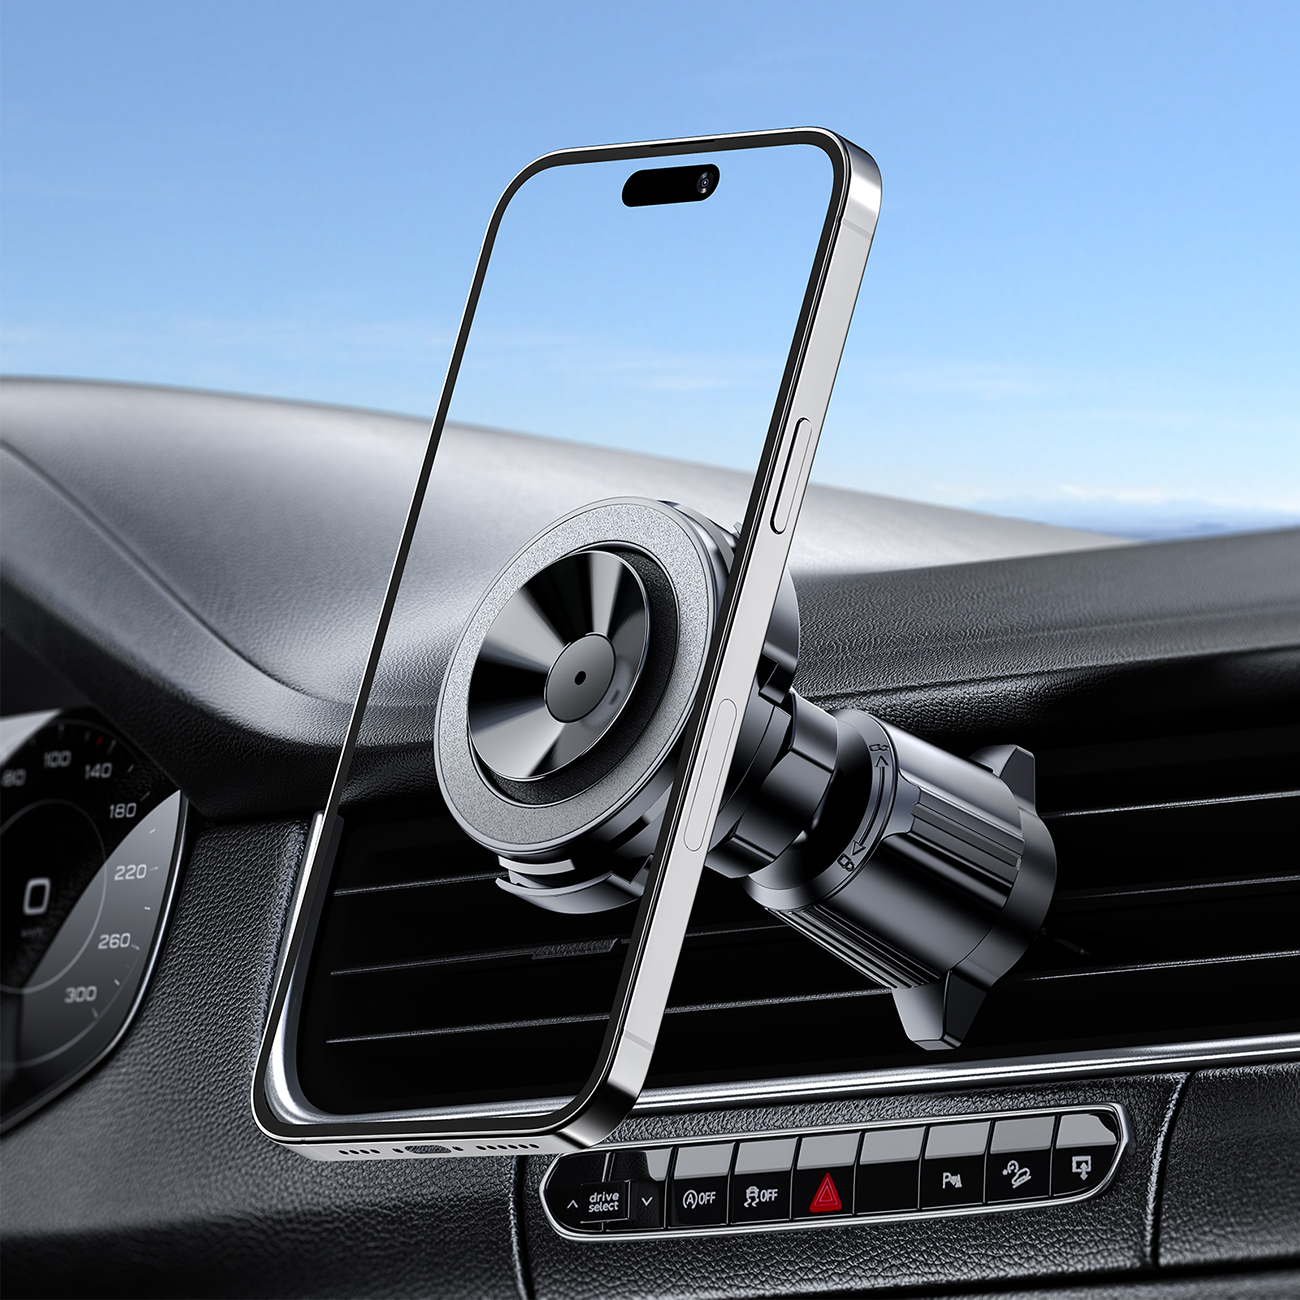 The phone is attached to the Acefast D22 magnetic holder mounted on the air vent in the car